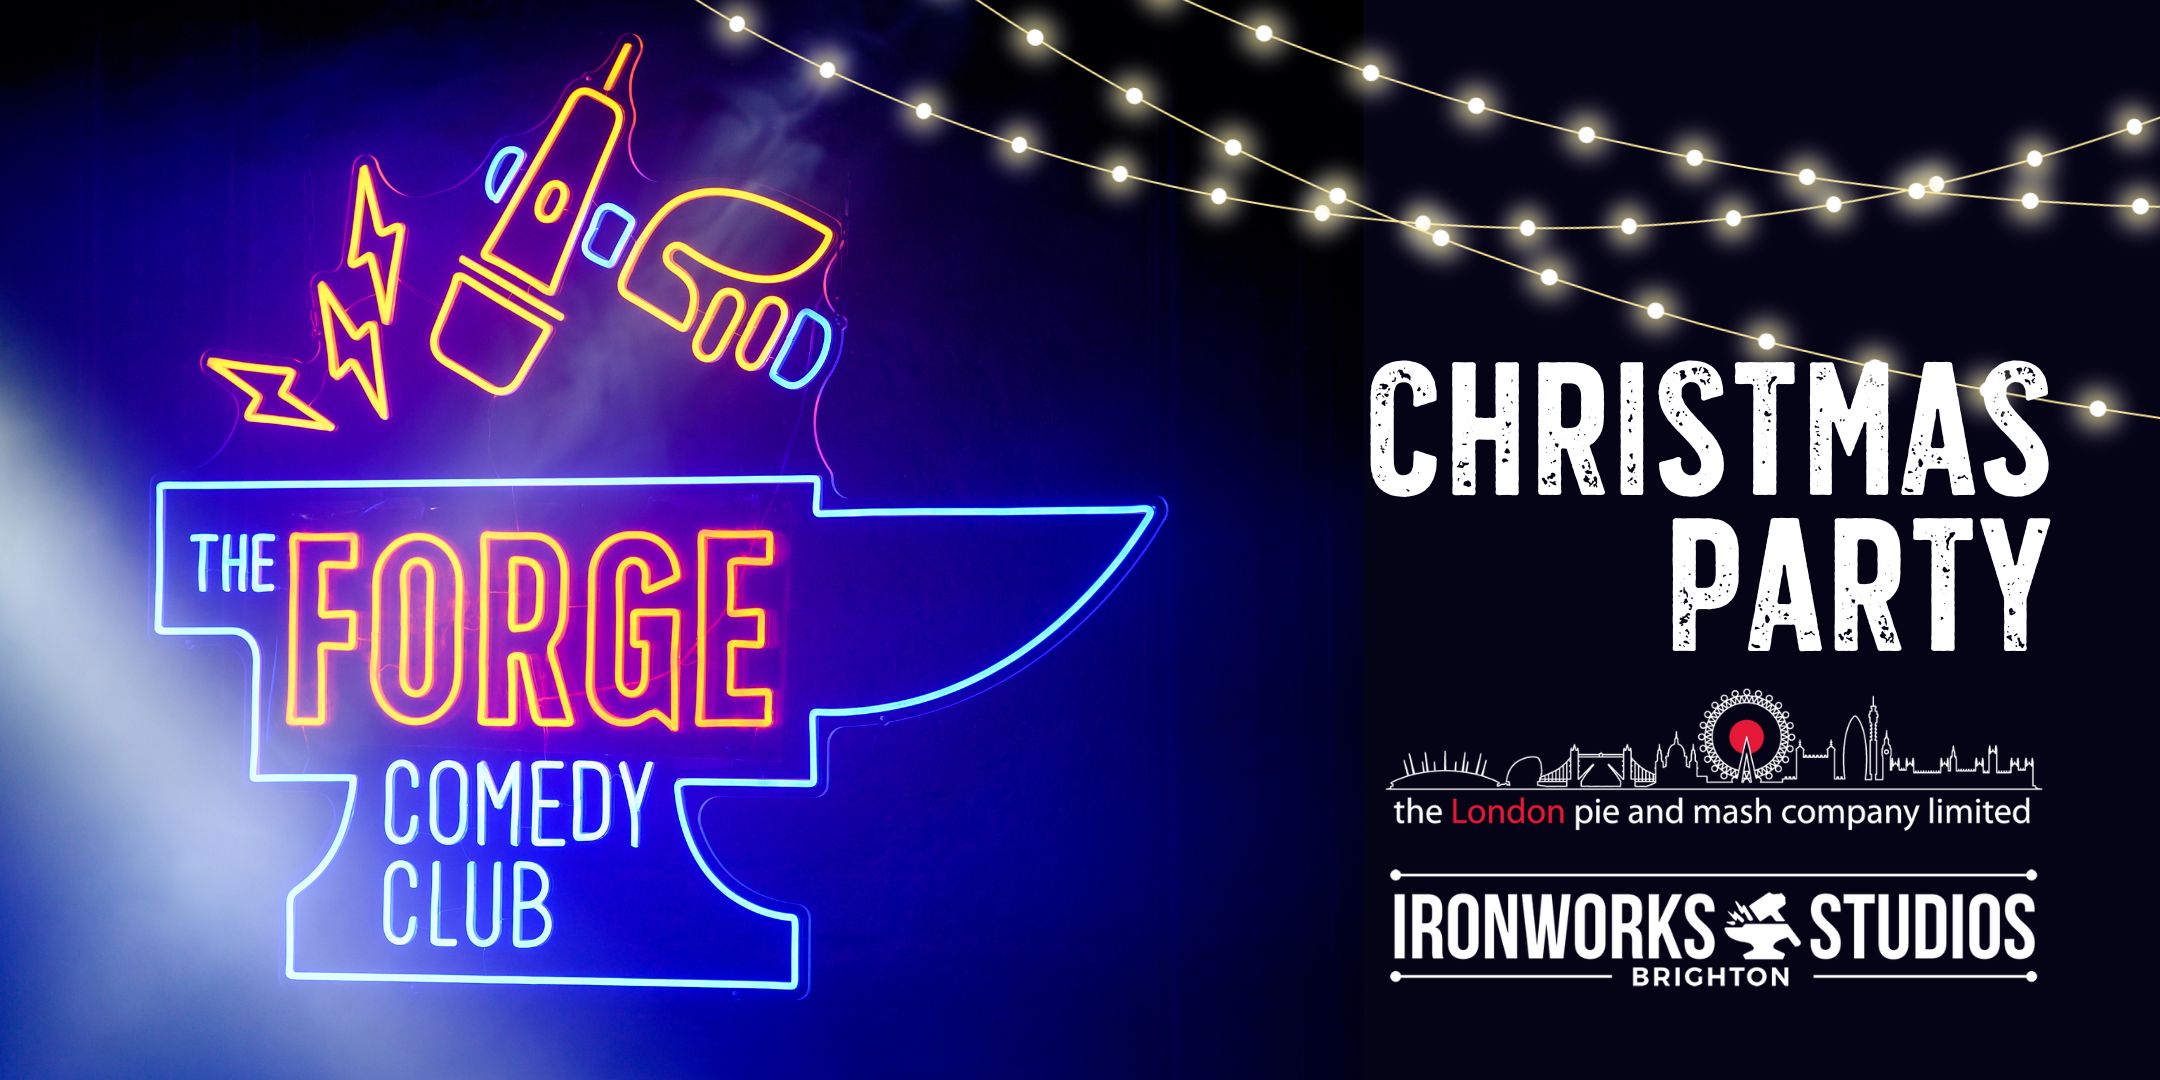 9th December: The Forge Comedy Club Christmas Party